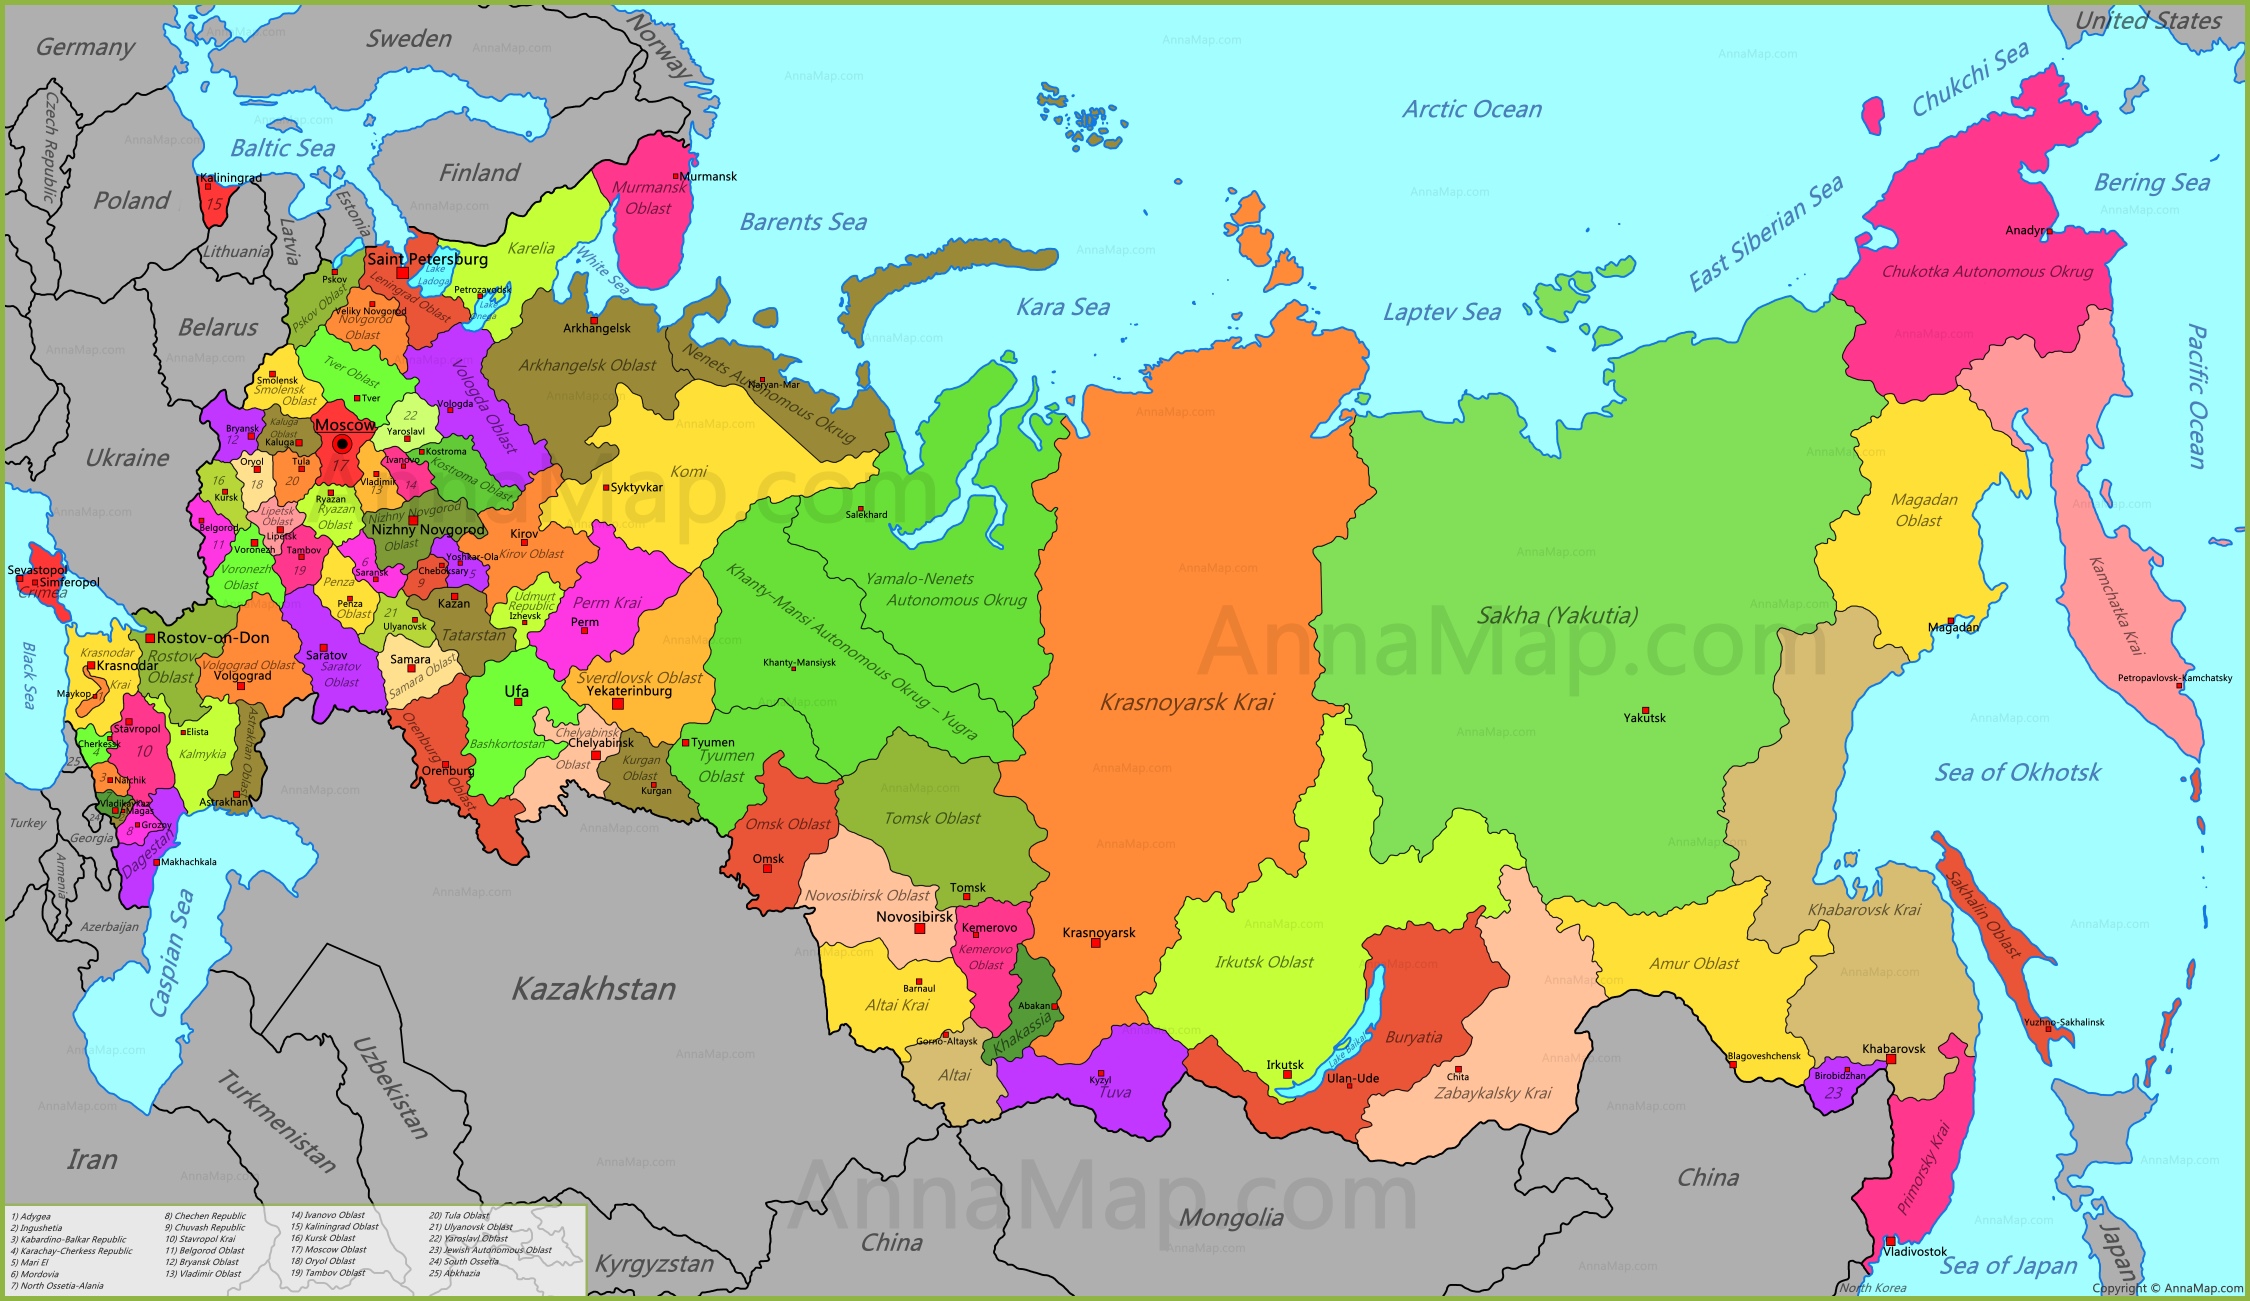 Russia Map | Map of Russia (Russian Federation) - AnnaMap.com